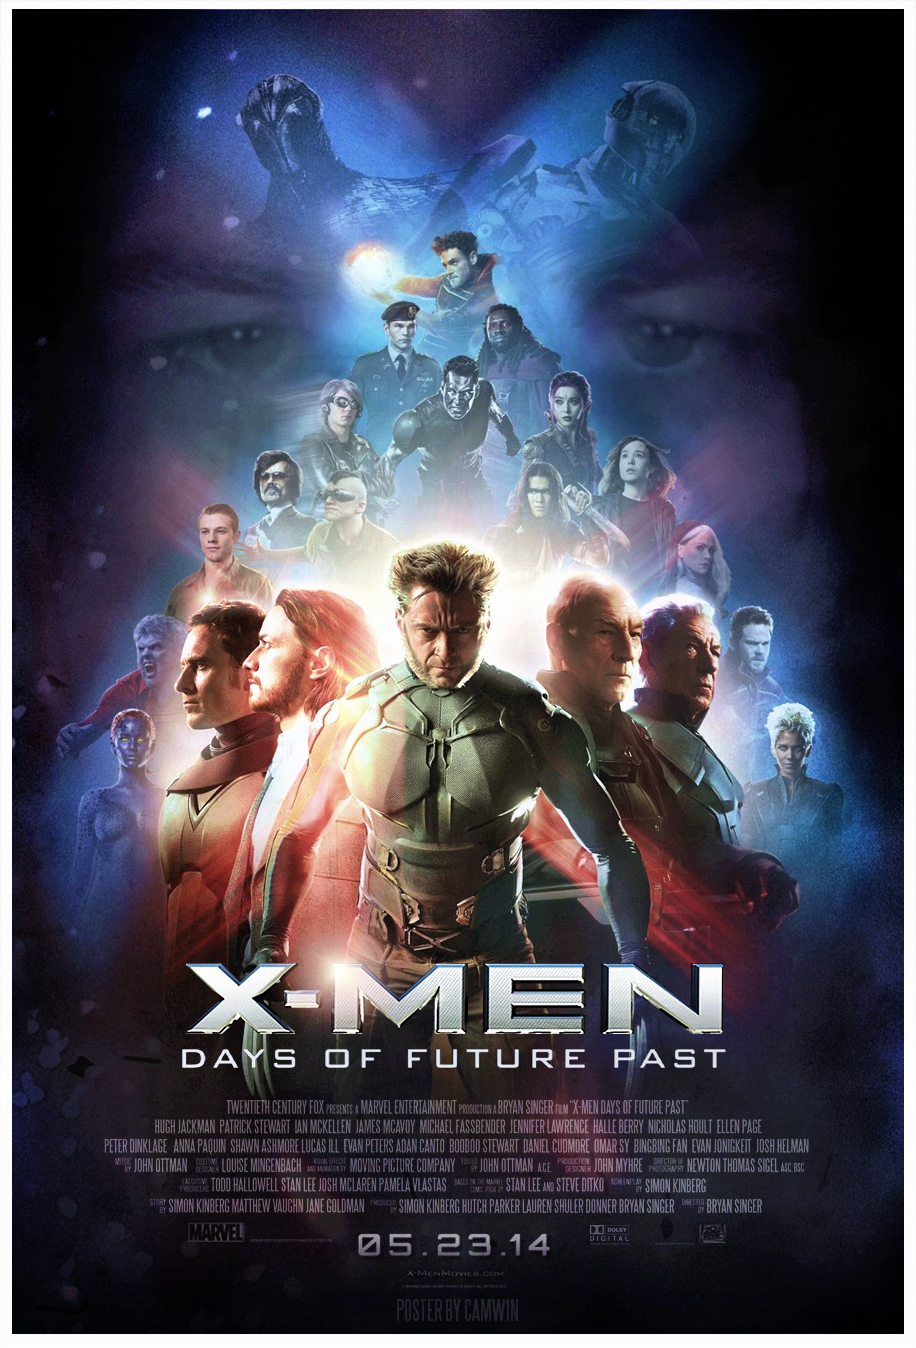 x_men__days_of_future_past___2014____poster_by_camw1n-d7ahfne.png